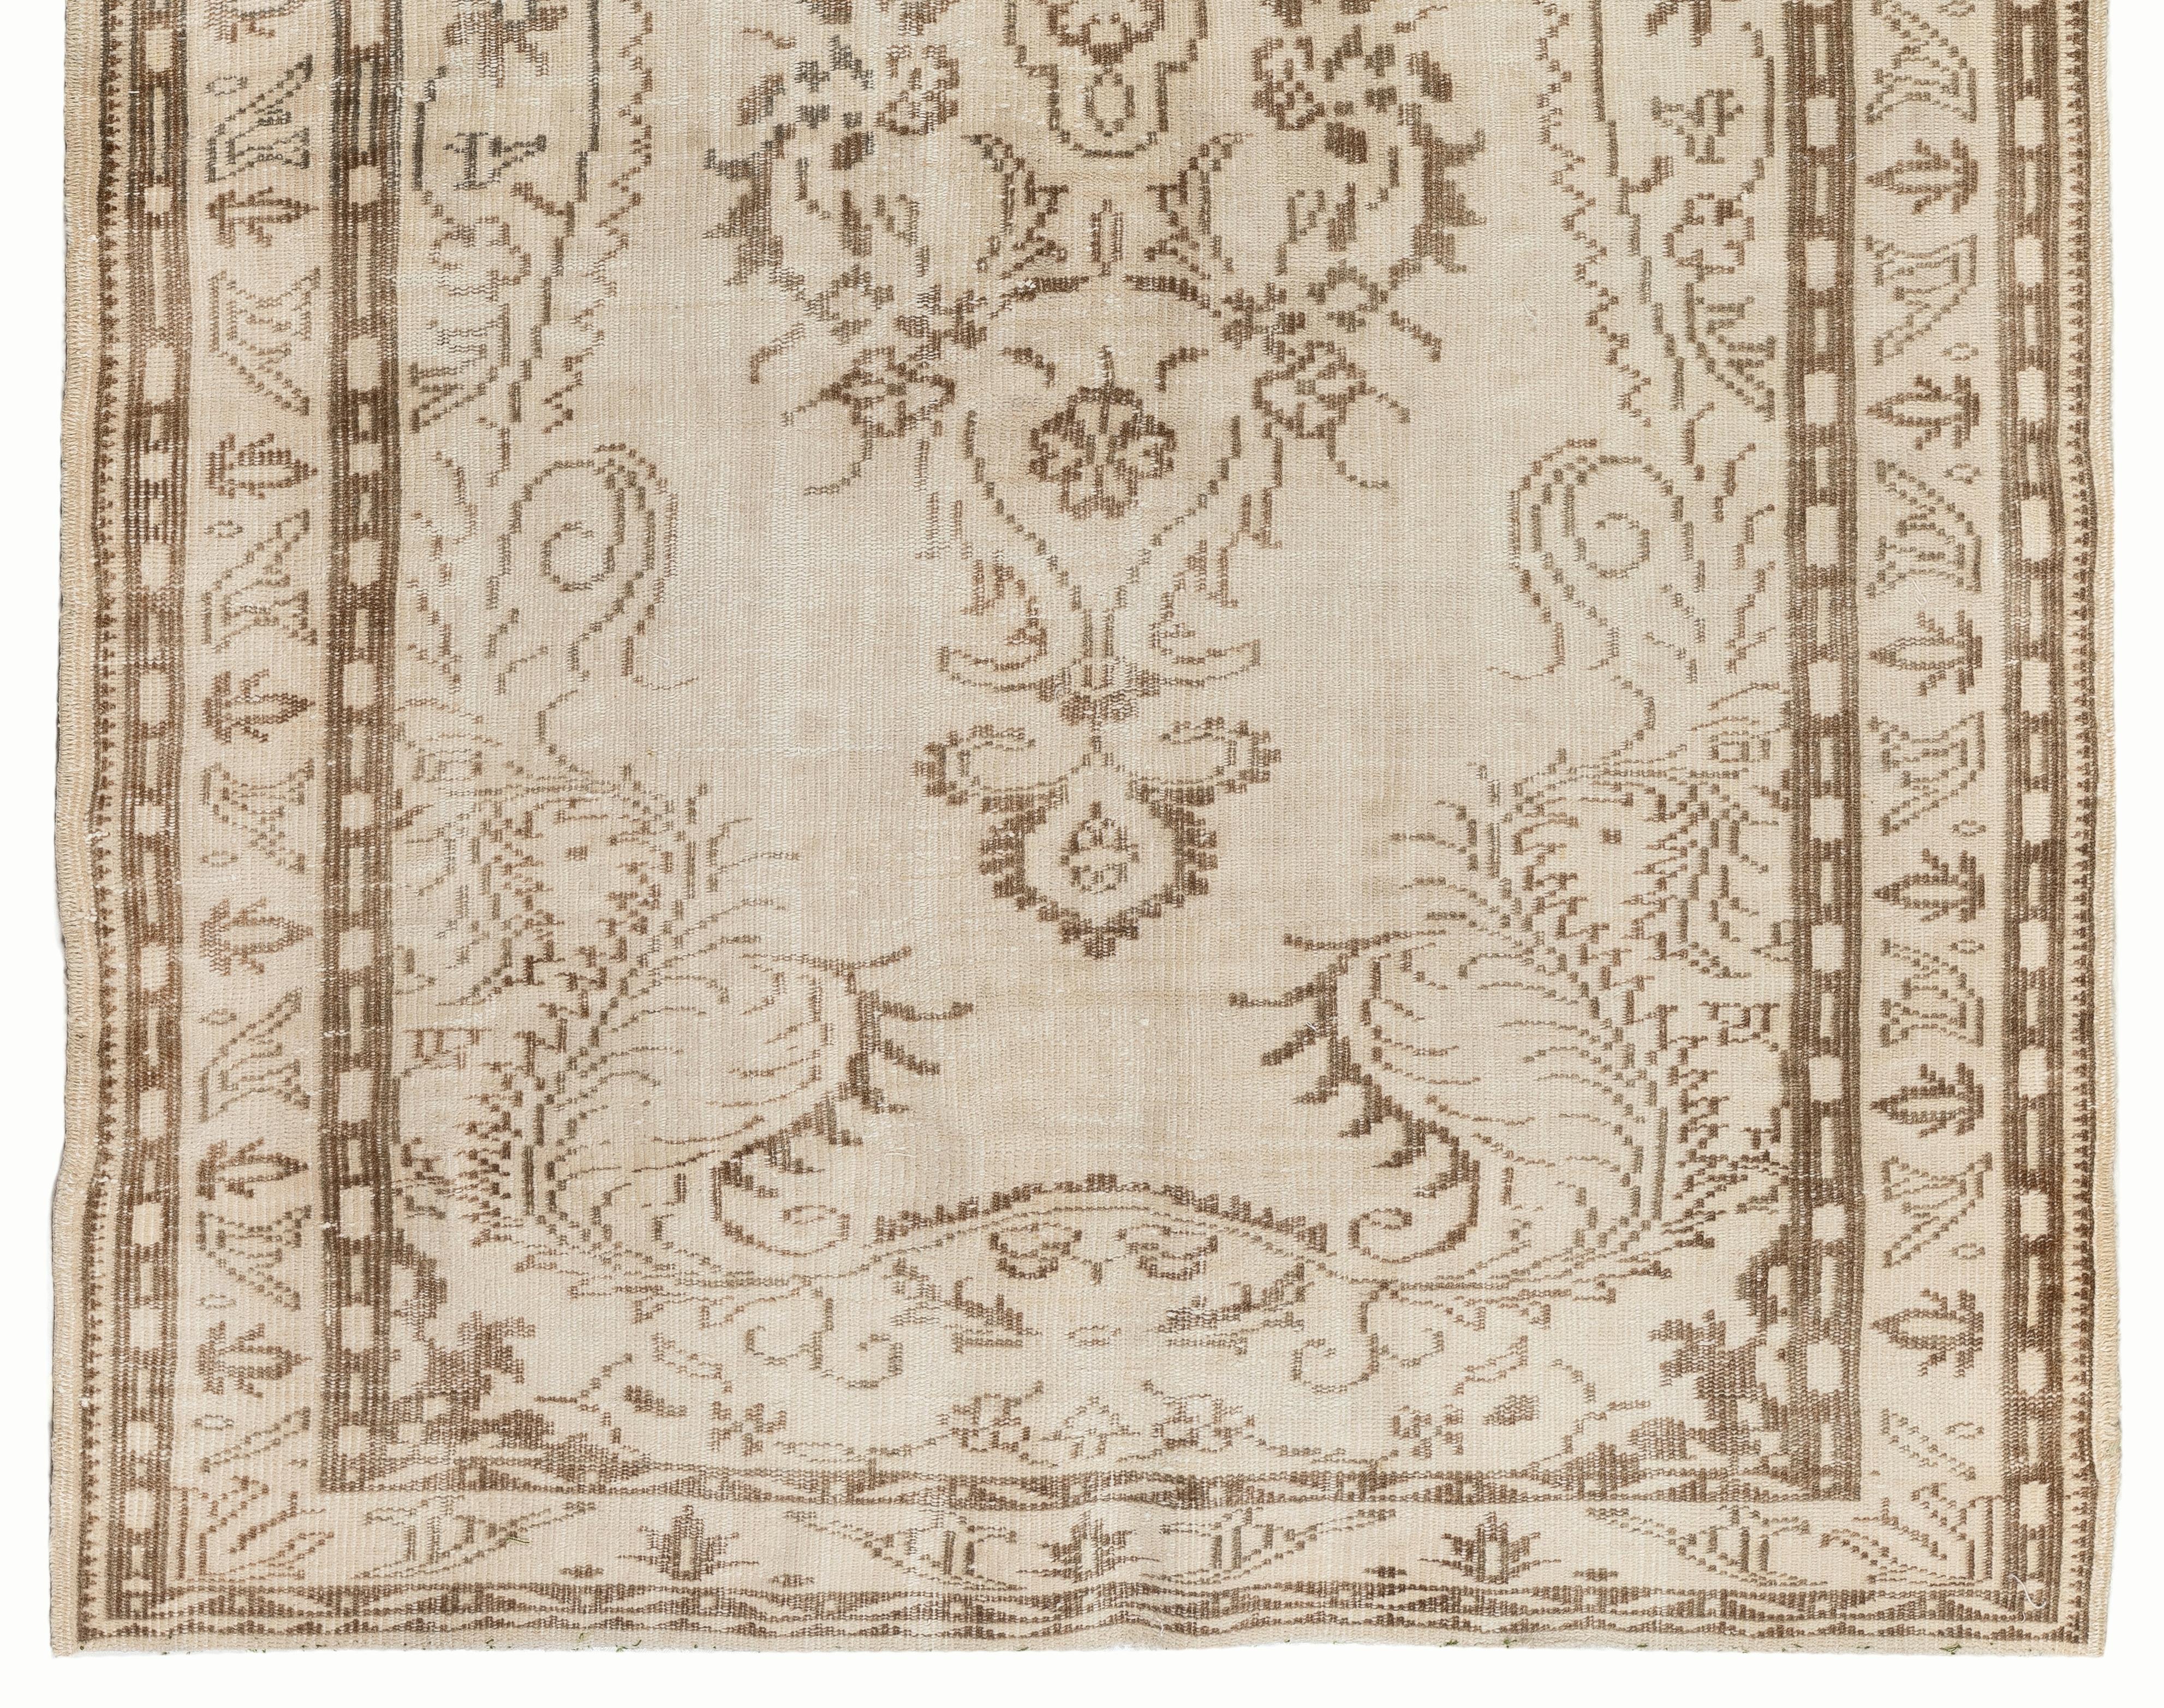 Hand-Knotted 5.4x8.4 ftHandmade Vintage Medallion Design Turkish Area Rug in Neutral Colors For Sale